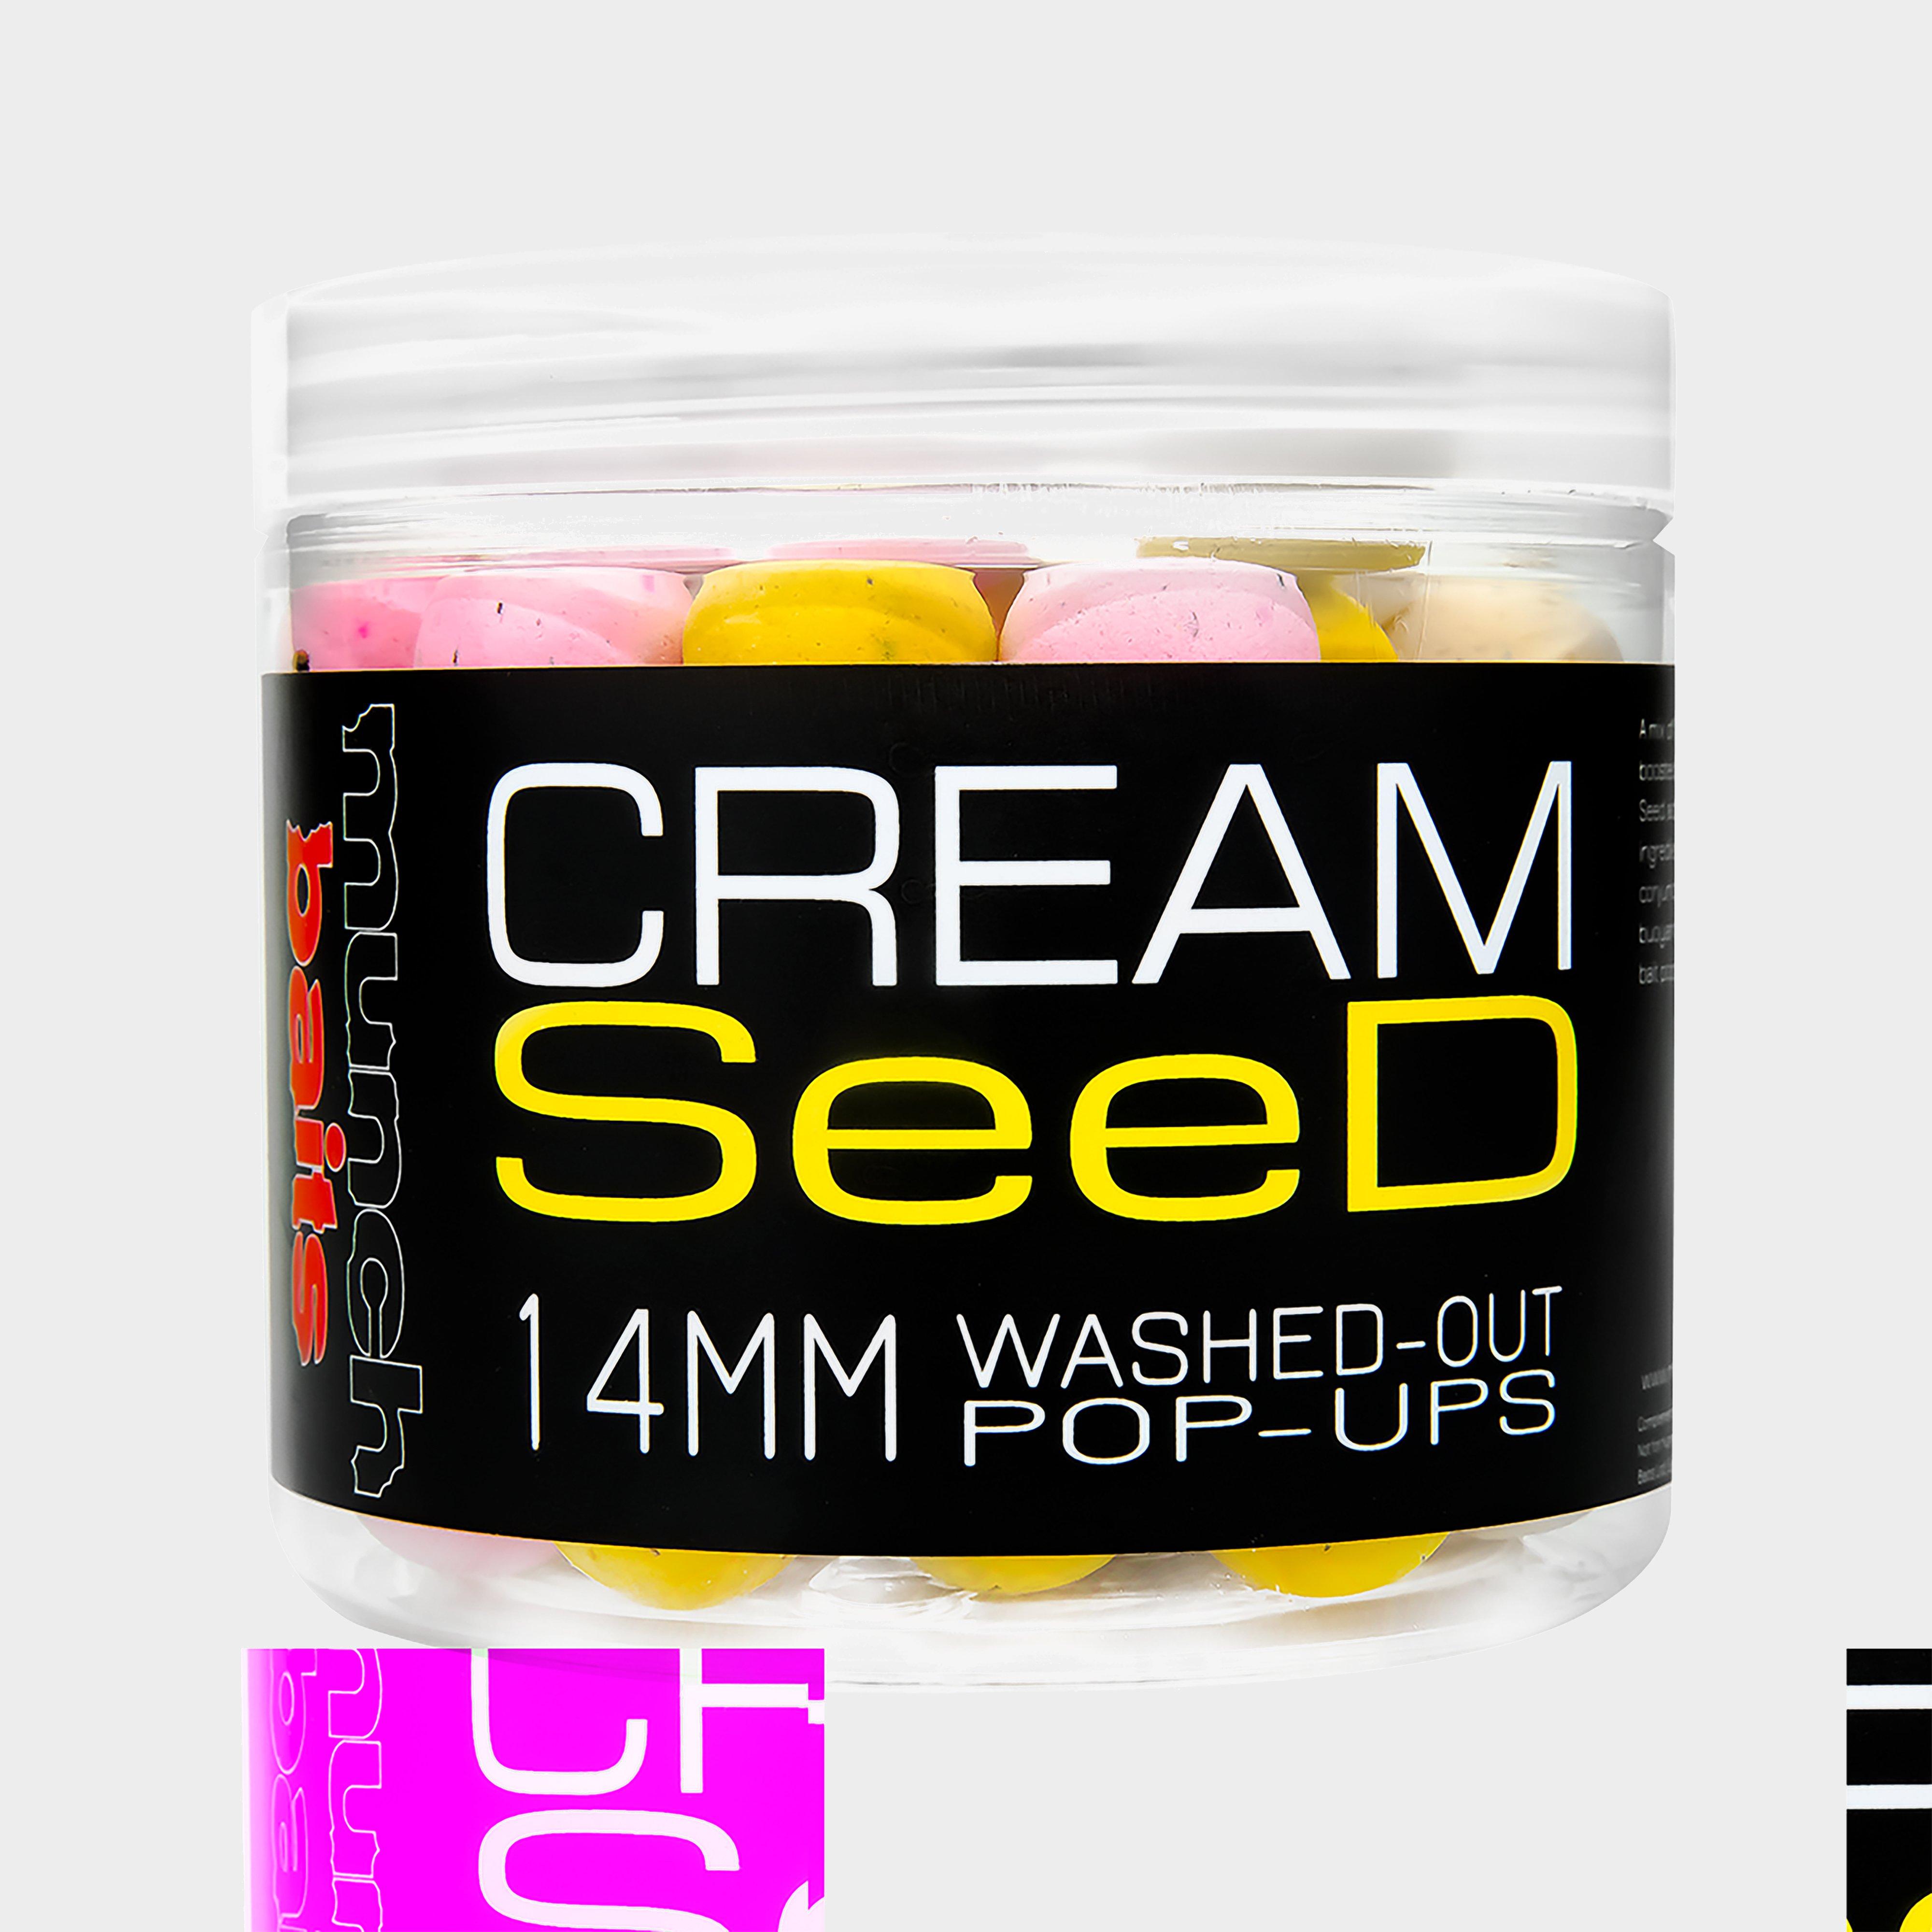 Munch Cream Seed Washed Out Pop-ups 14mm - Multi/ups  Multi/ups